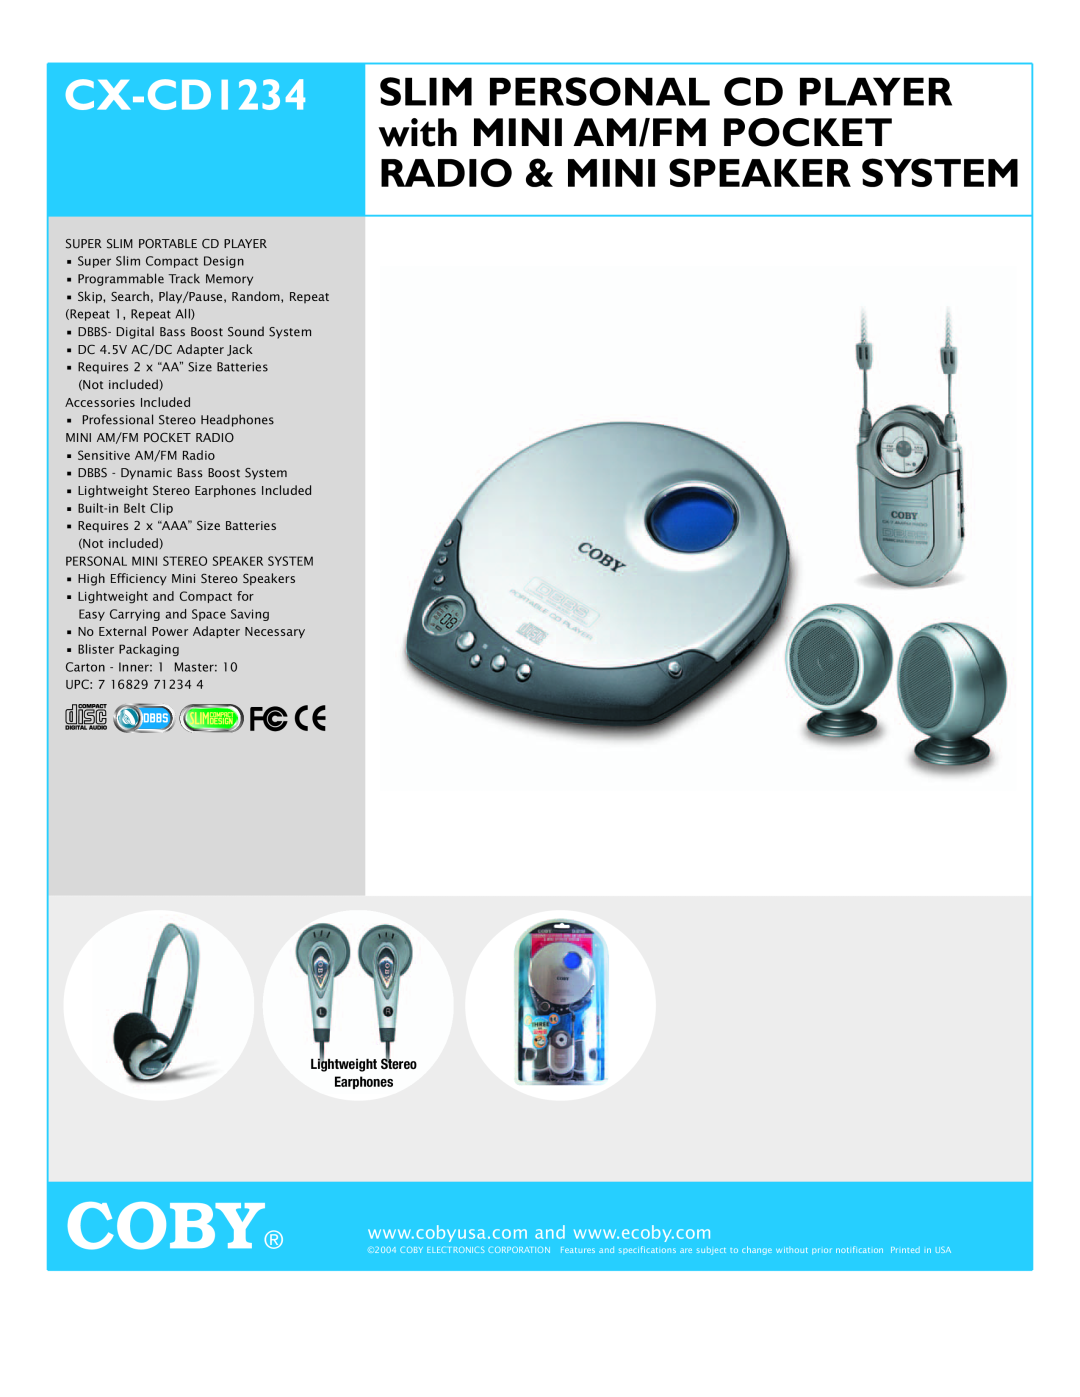 COBY electronic CX-CD1234 specifications Coby, Radio & Mini Speaker System, Lightweight Stereo Earphones 